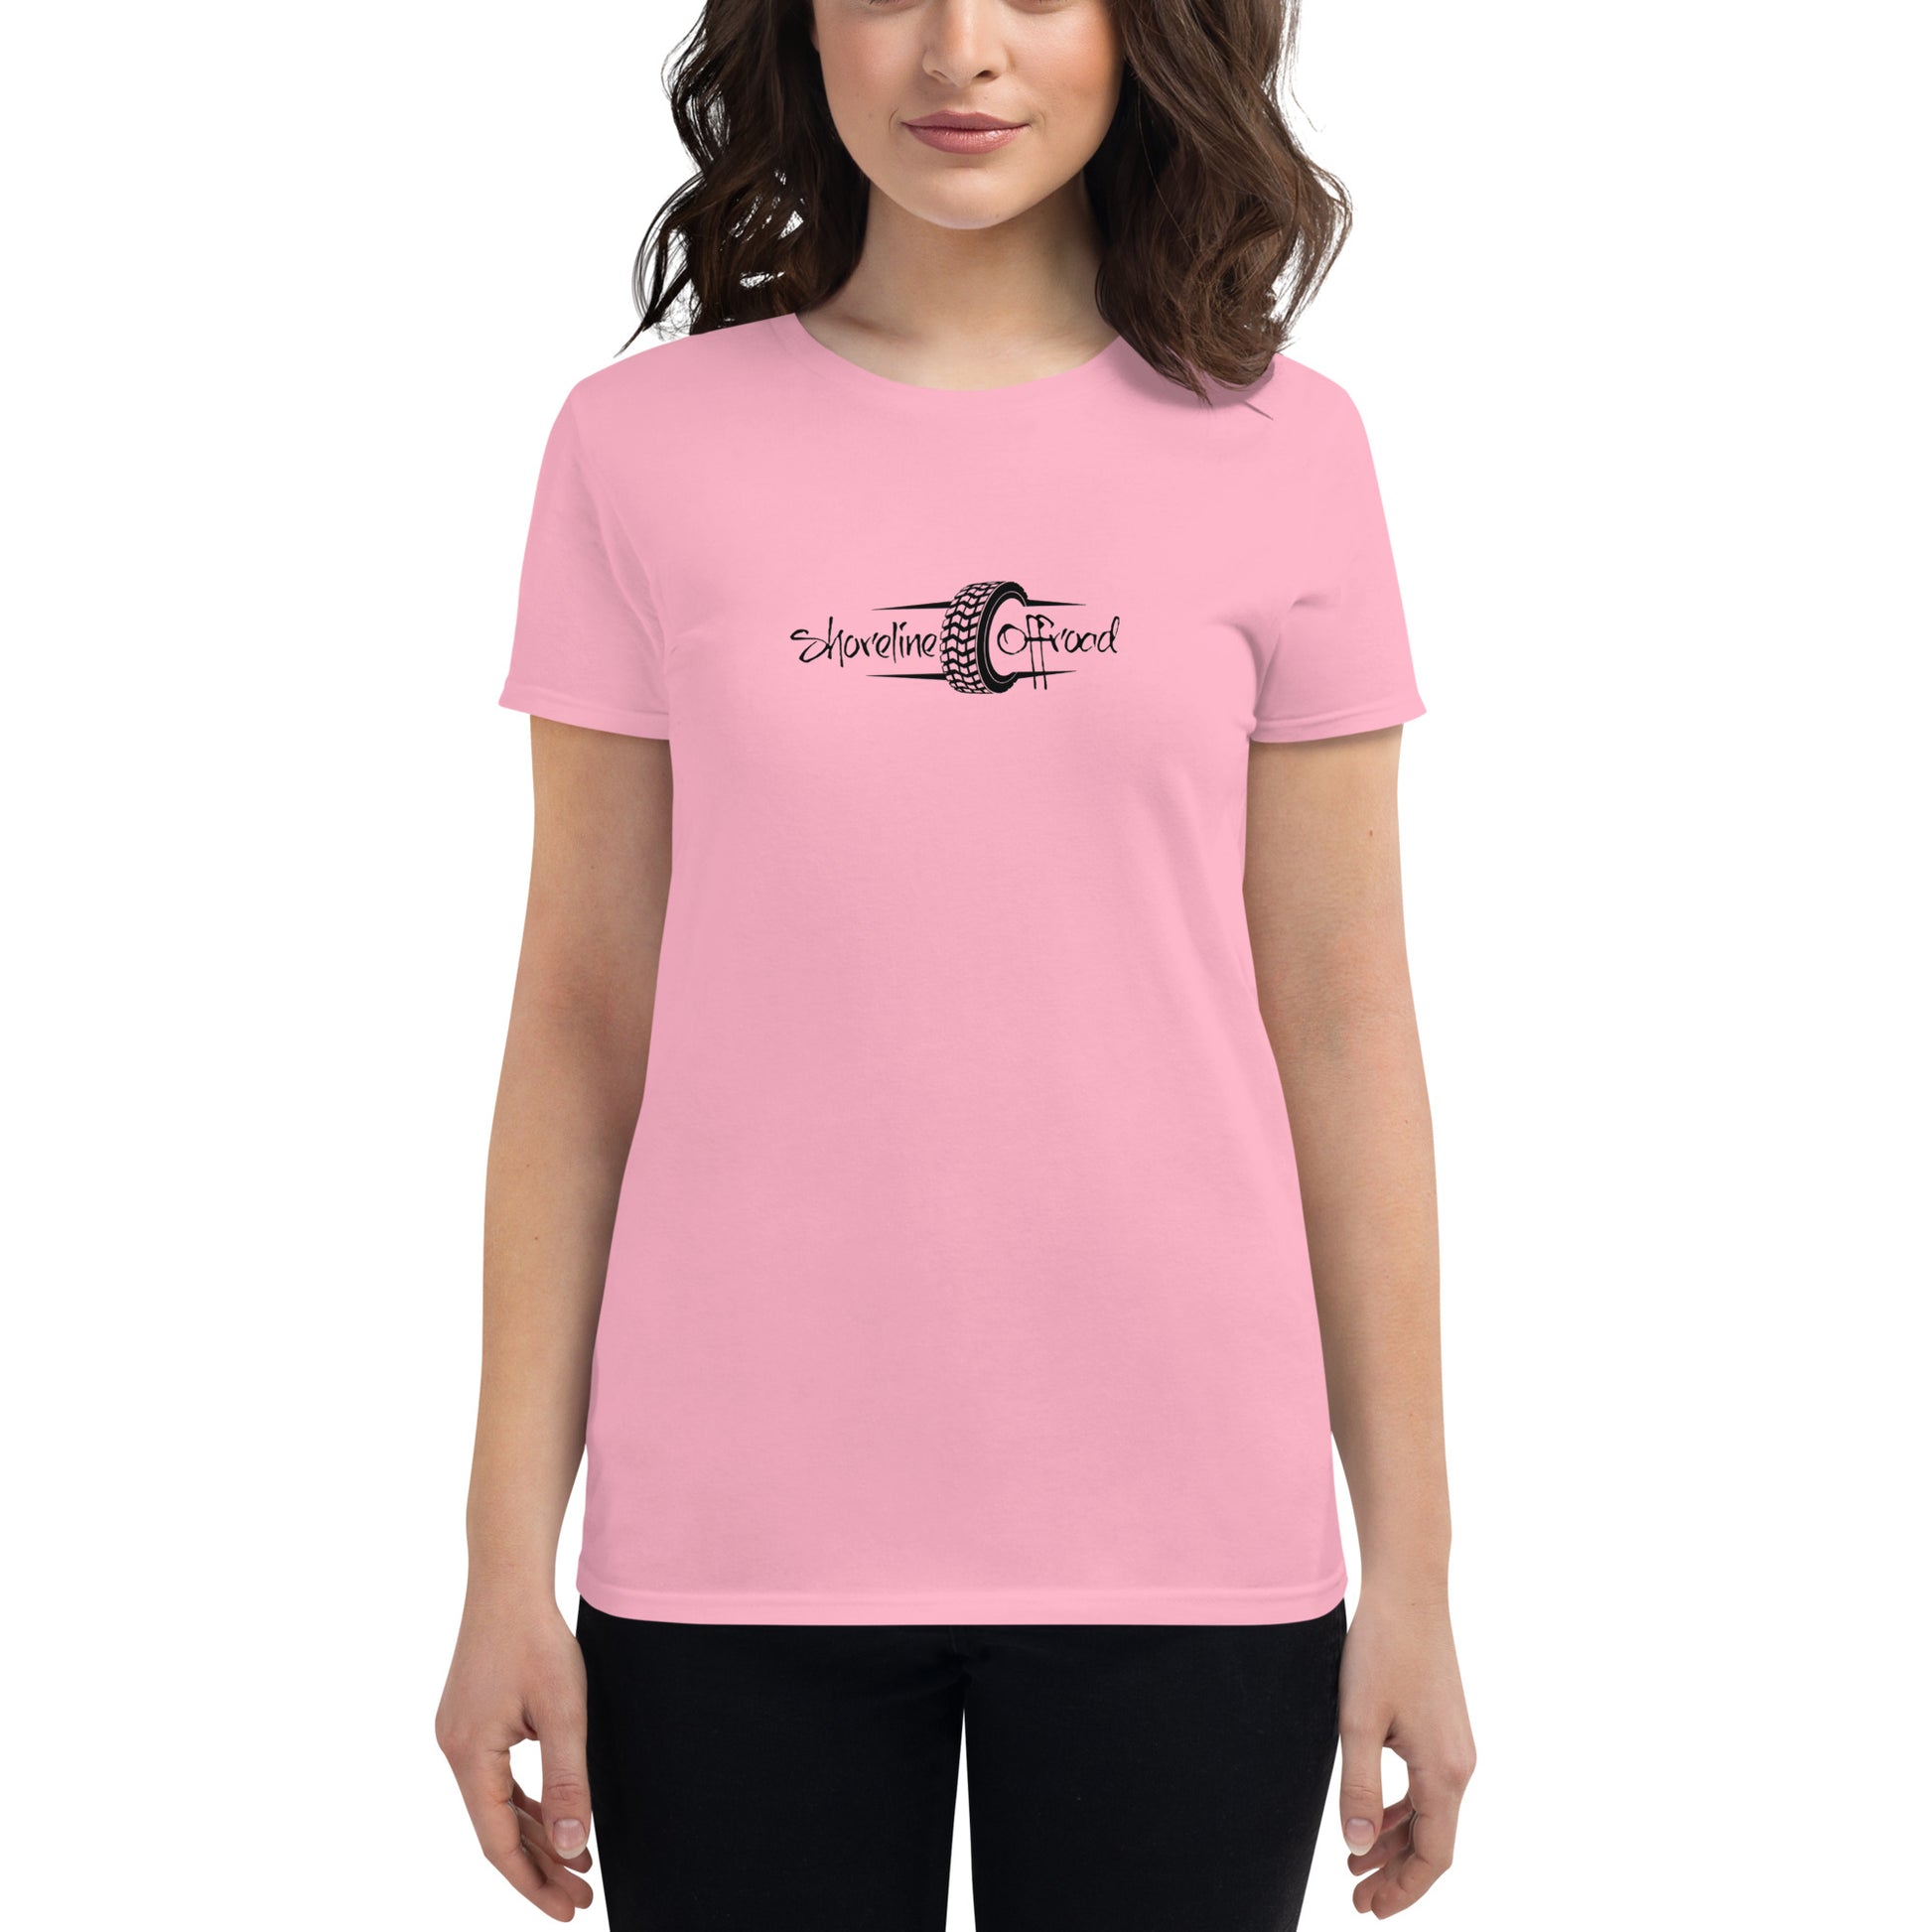 a woman wearing a pink t - shirt with a black and white logo